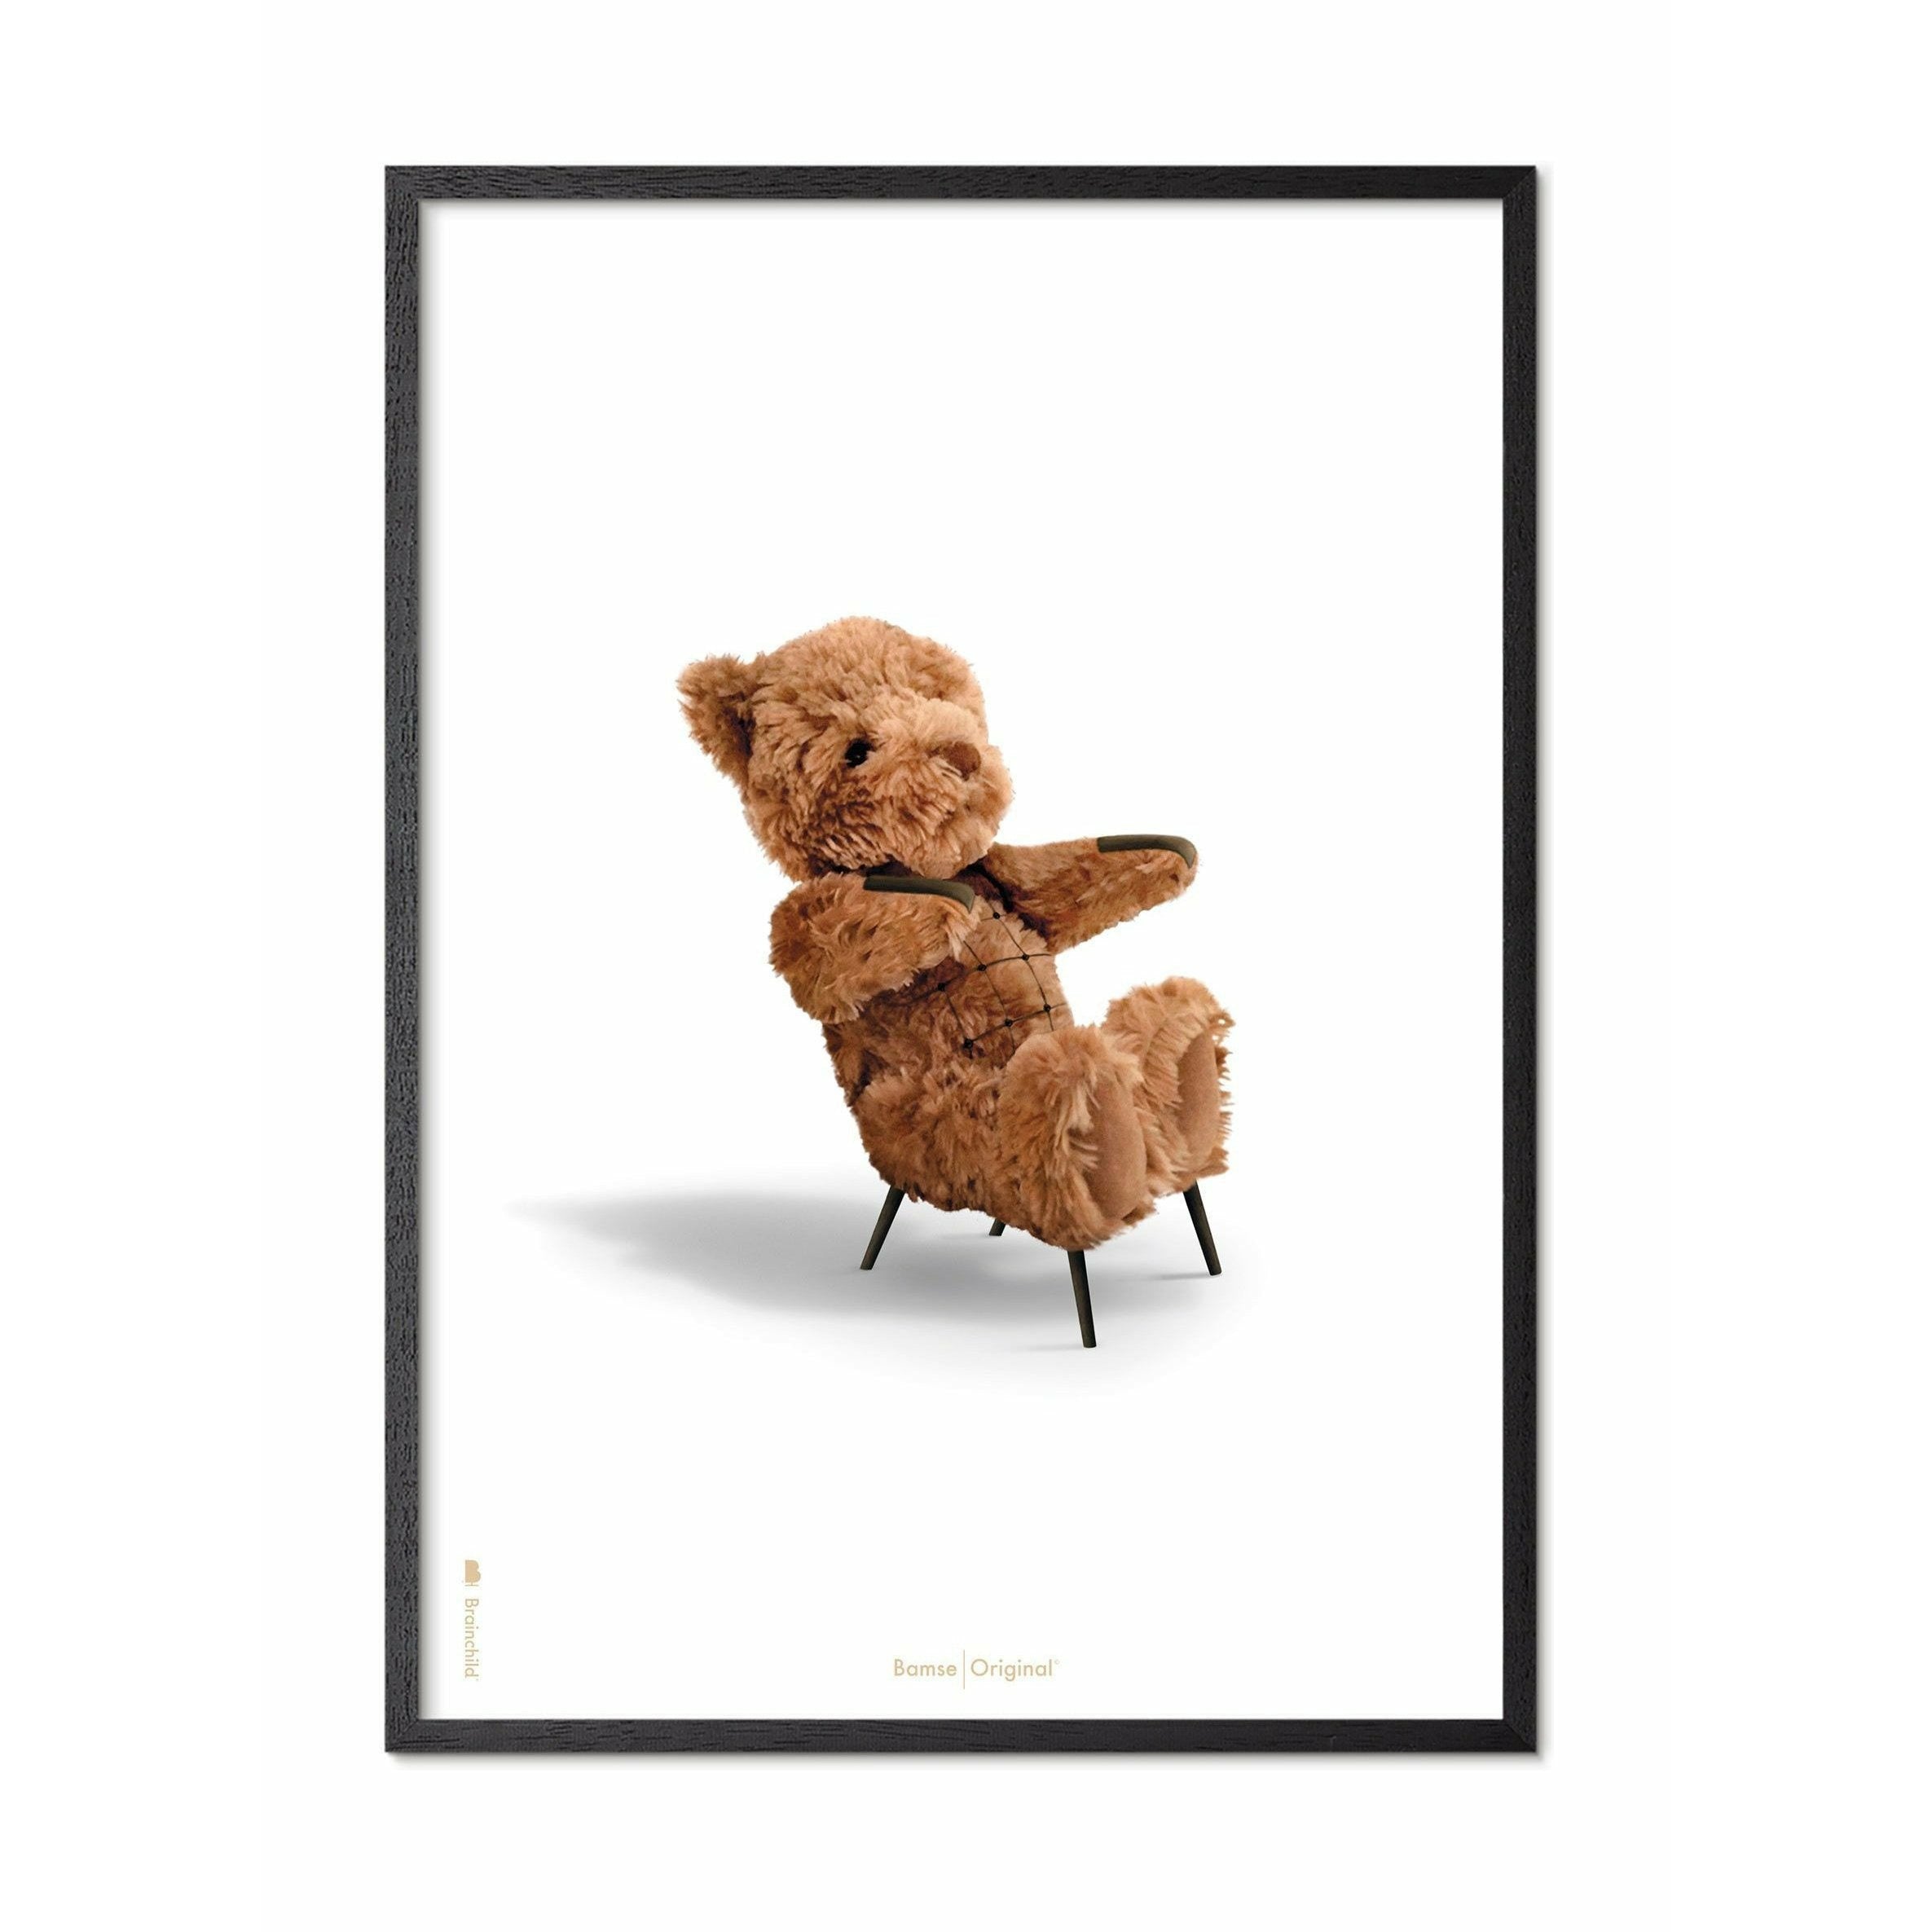 Brainchild Teddy Bear Classic Poster, Frame In Black Lacquered Wood 50x70 Cm, White Background